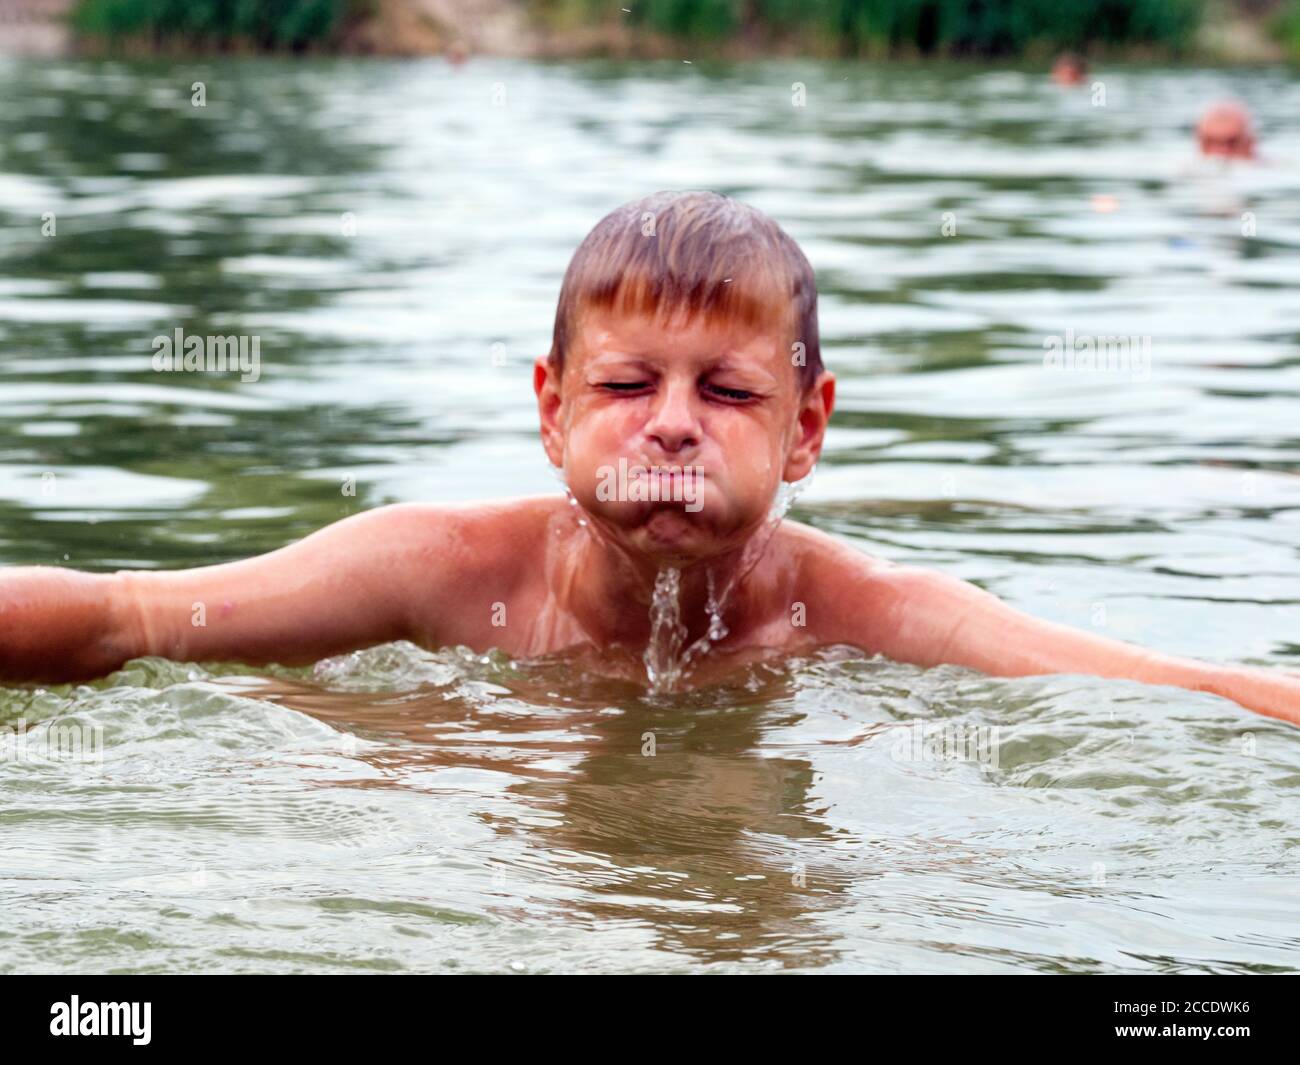 Water runs down the face of a Caucasian boy emerging from the lake Stock Photo